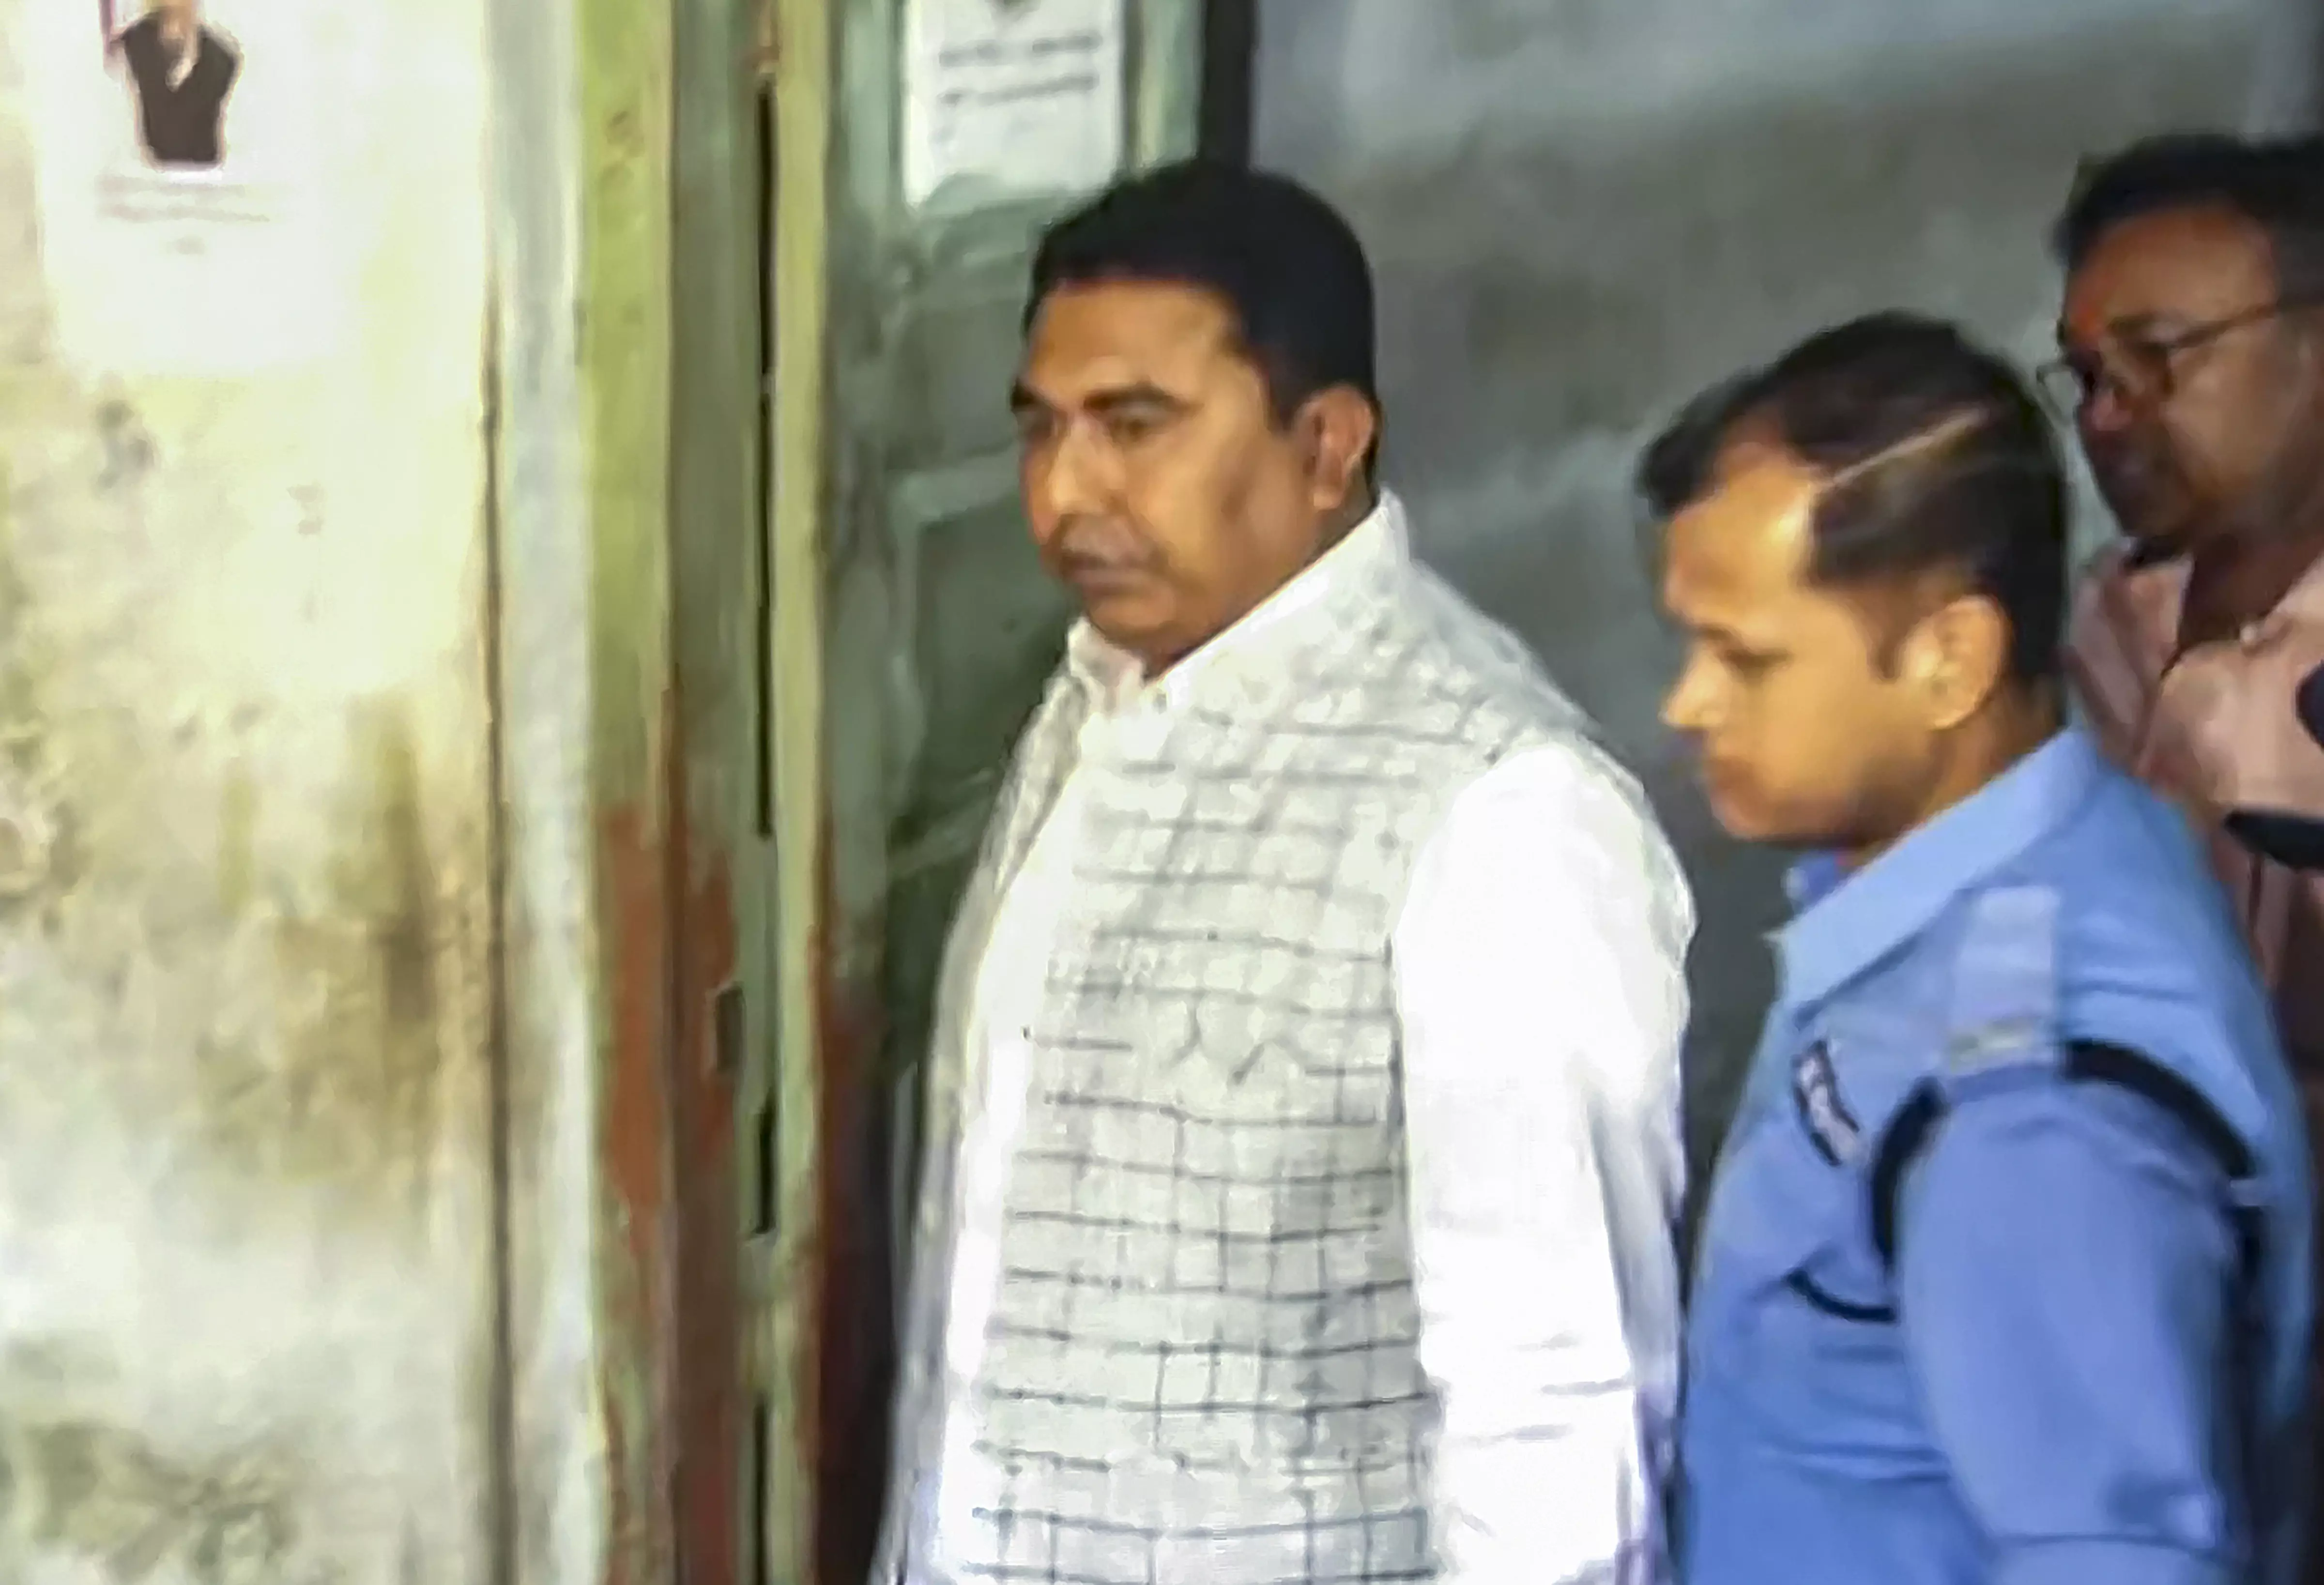 Bengal: Shahjahan’s CBI custody extended by 4 days in ED attack case